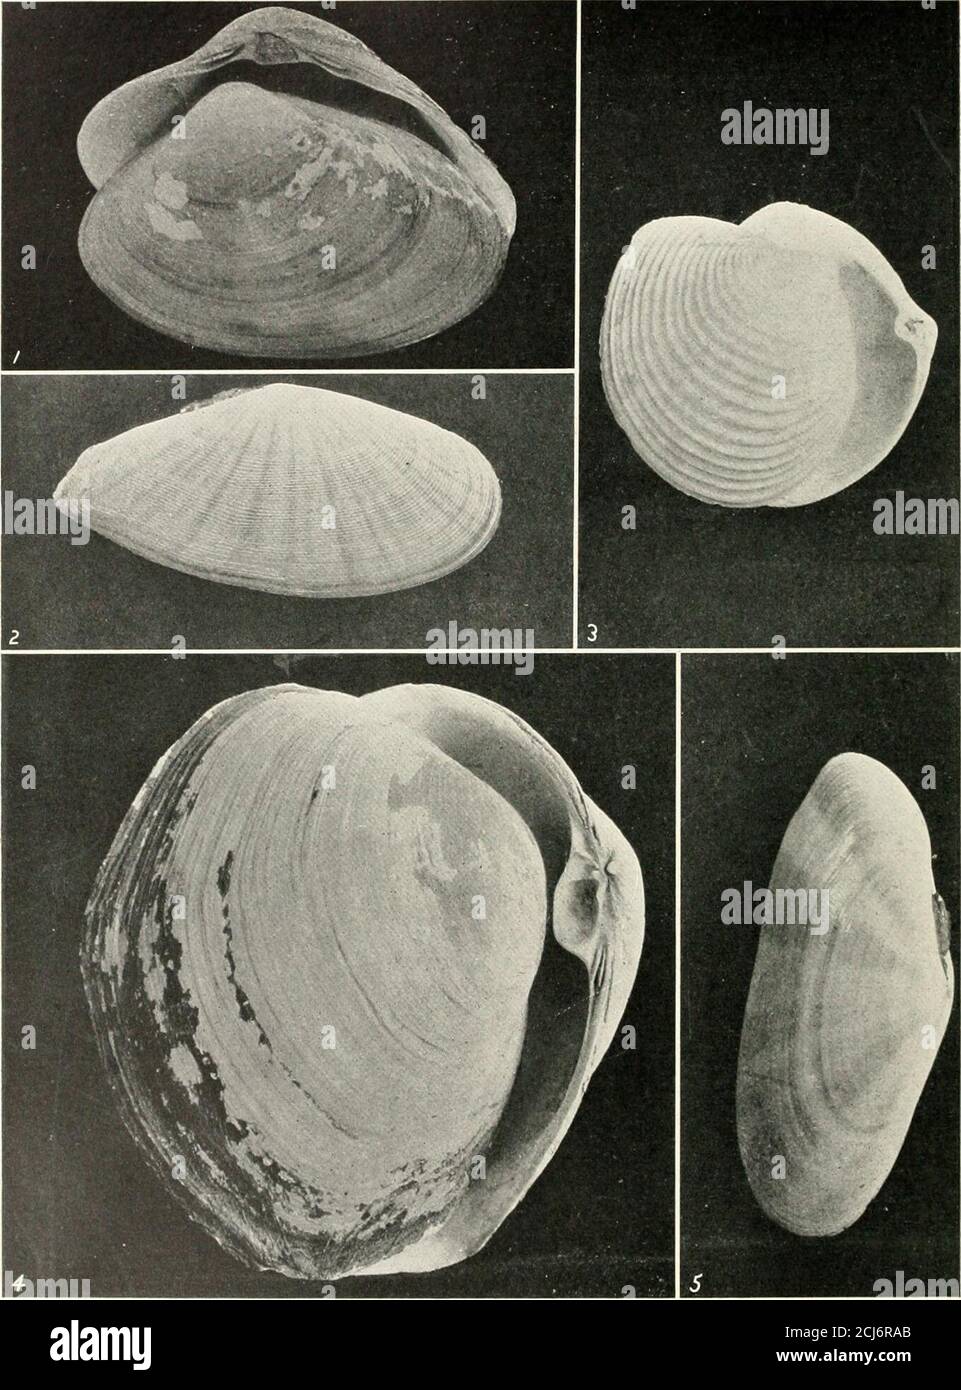 . The shell book . 1 Donax scorhtm. 2 Donax varidbUfs* WEDGE SHELLS AND TELLENS 3 Afaconm secla. 4 Macoma tiasuta. 5 Tdlinctla rostrata. 6 TelHna discus. 7 Psatnmobia maxima.. 1 Surf Clam, Mactra solidissium. 4 Ottt-r Shel GIANT CLAMS AND SUNSET SHELLS 2 Beaked Sunset Shell, Tdlina rostdlum. 3 Channeled Rita, Rata i Lutraria maxima. 5 Rayed Sunset Shell, Tellina radiata. The Semeles Gray, the veteran collector for the Marine Biological Laboratory,who knows the sea bottom of that region, and the inhabitantsthereof, as a cook knows her pantry shelves. It was August, and the ventricose shells of Stock Photo